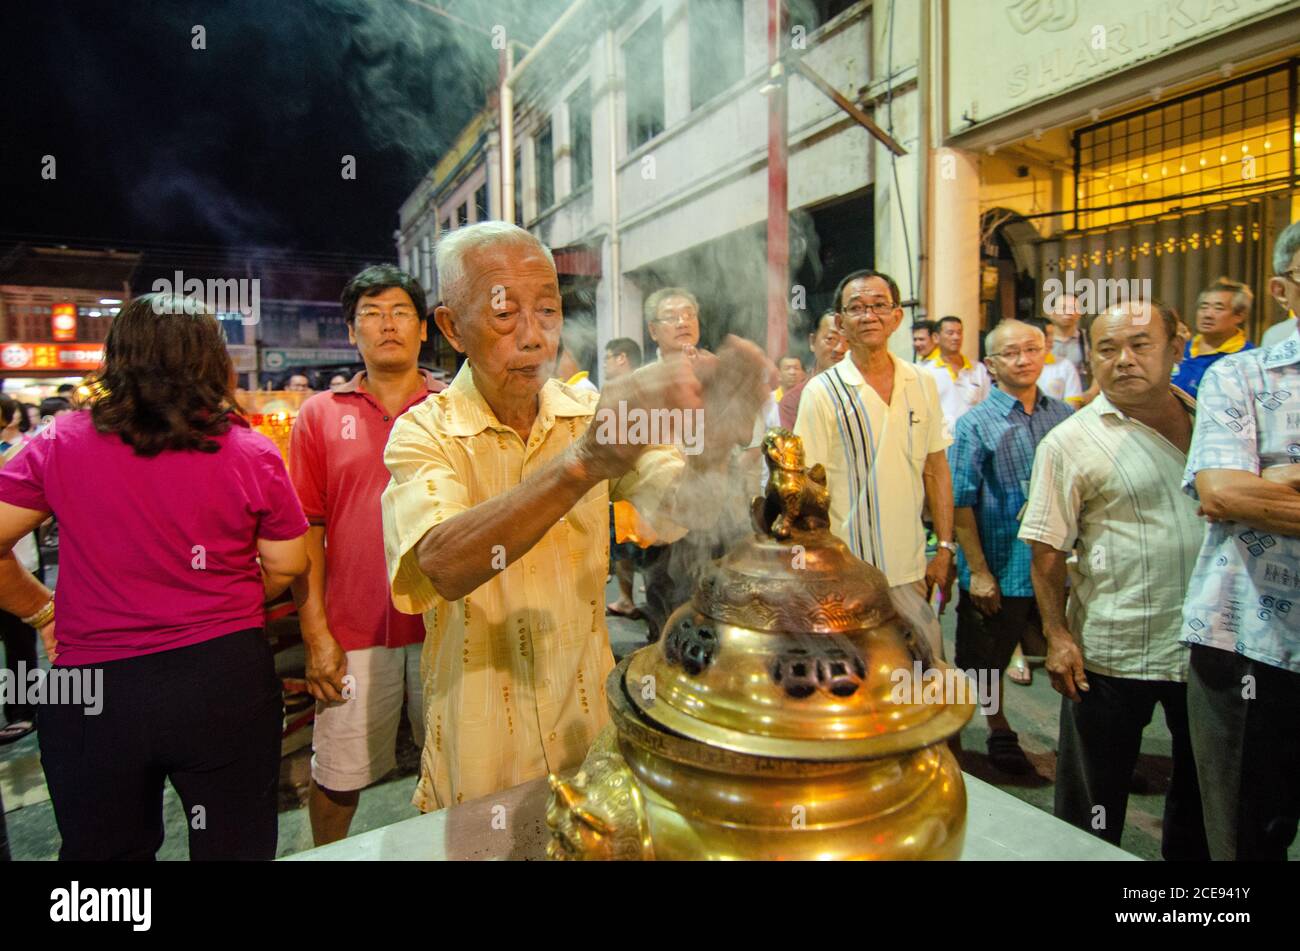 Bukit Mertajam, Penang/Malaysia - Aug 19 2016: Old man seek for blessing from the smoke release from pot. Stock Photo